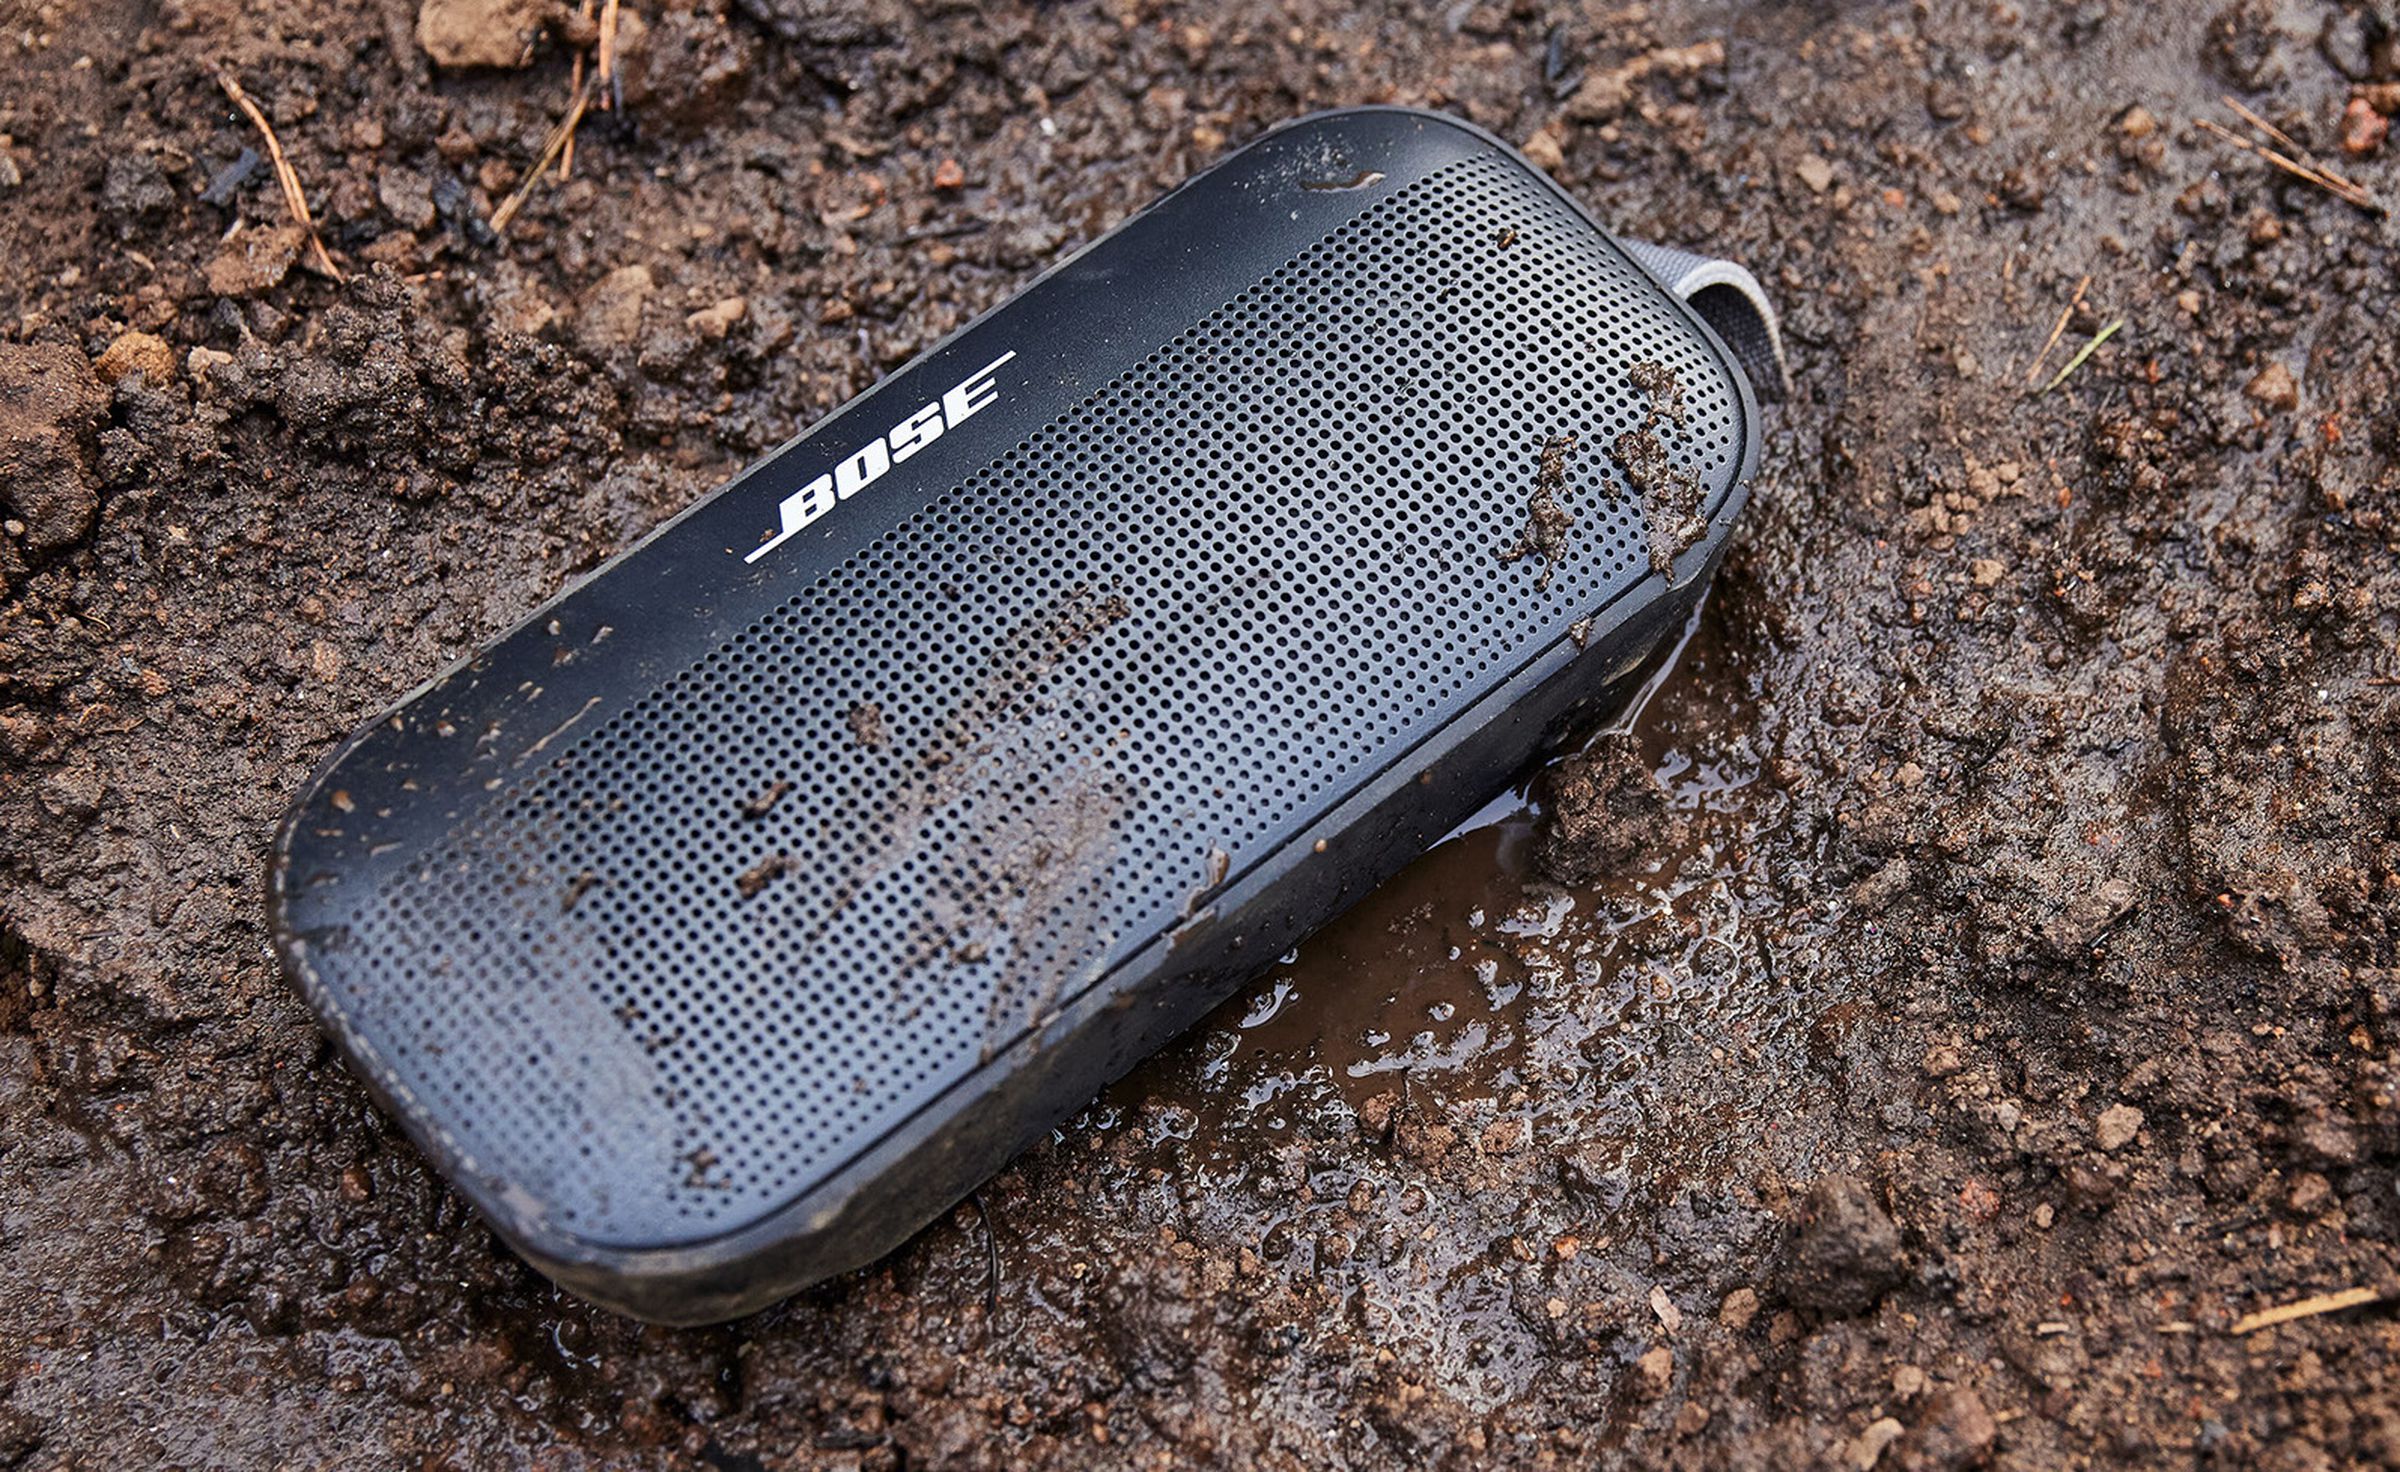 The speaker is designed to withstand the elements.